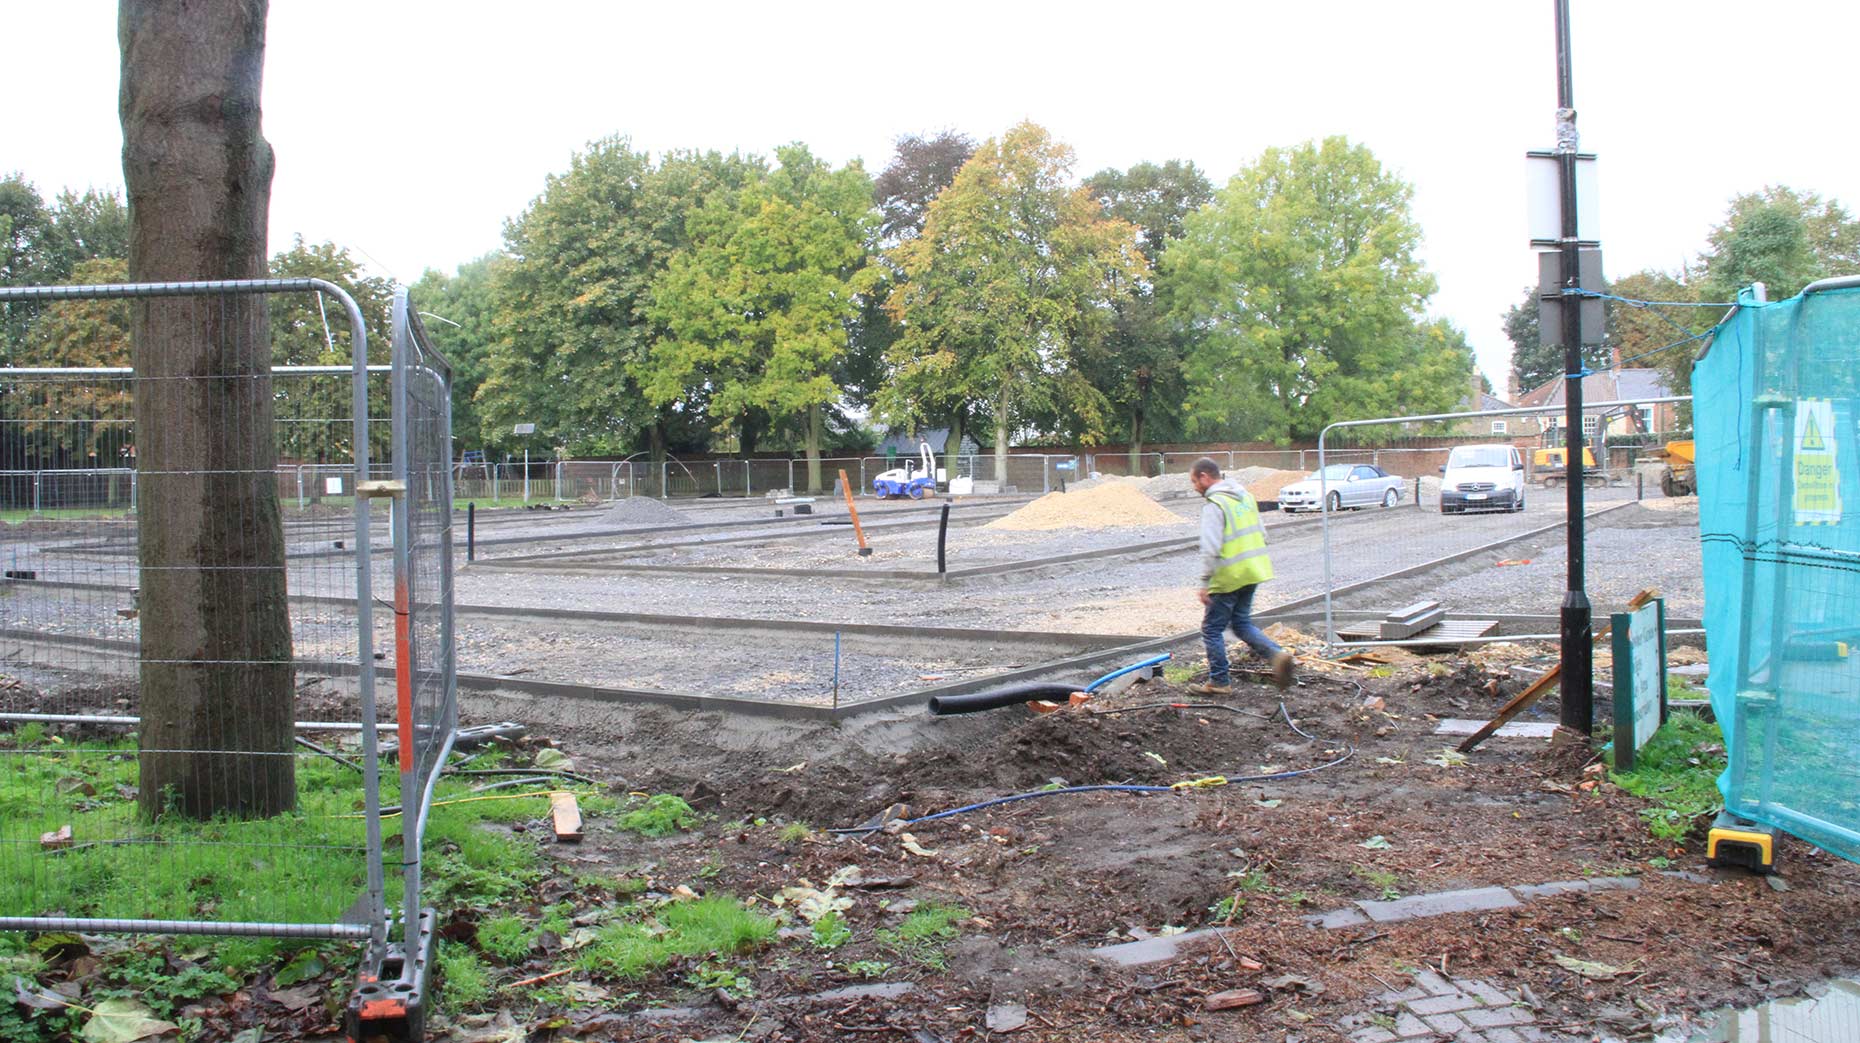 The new car park will be complete in time for the 2016 Lincoln Christmas Market. Photo: Emily Norton for The Lincolnite